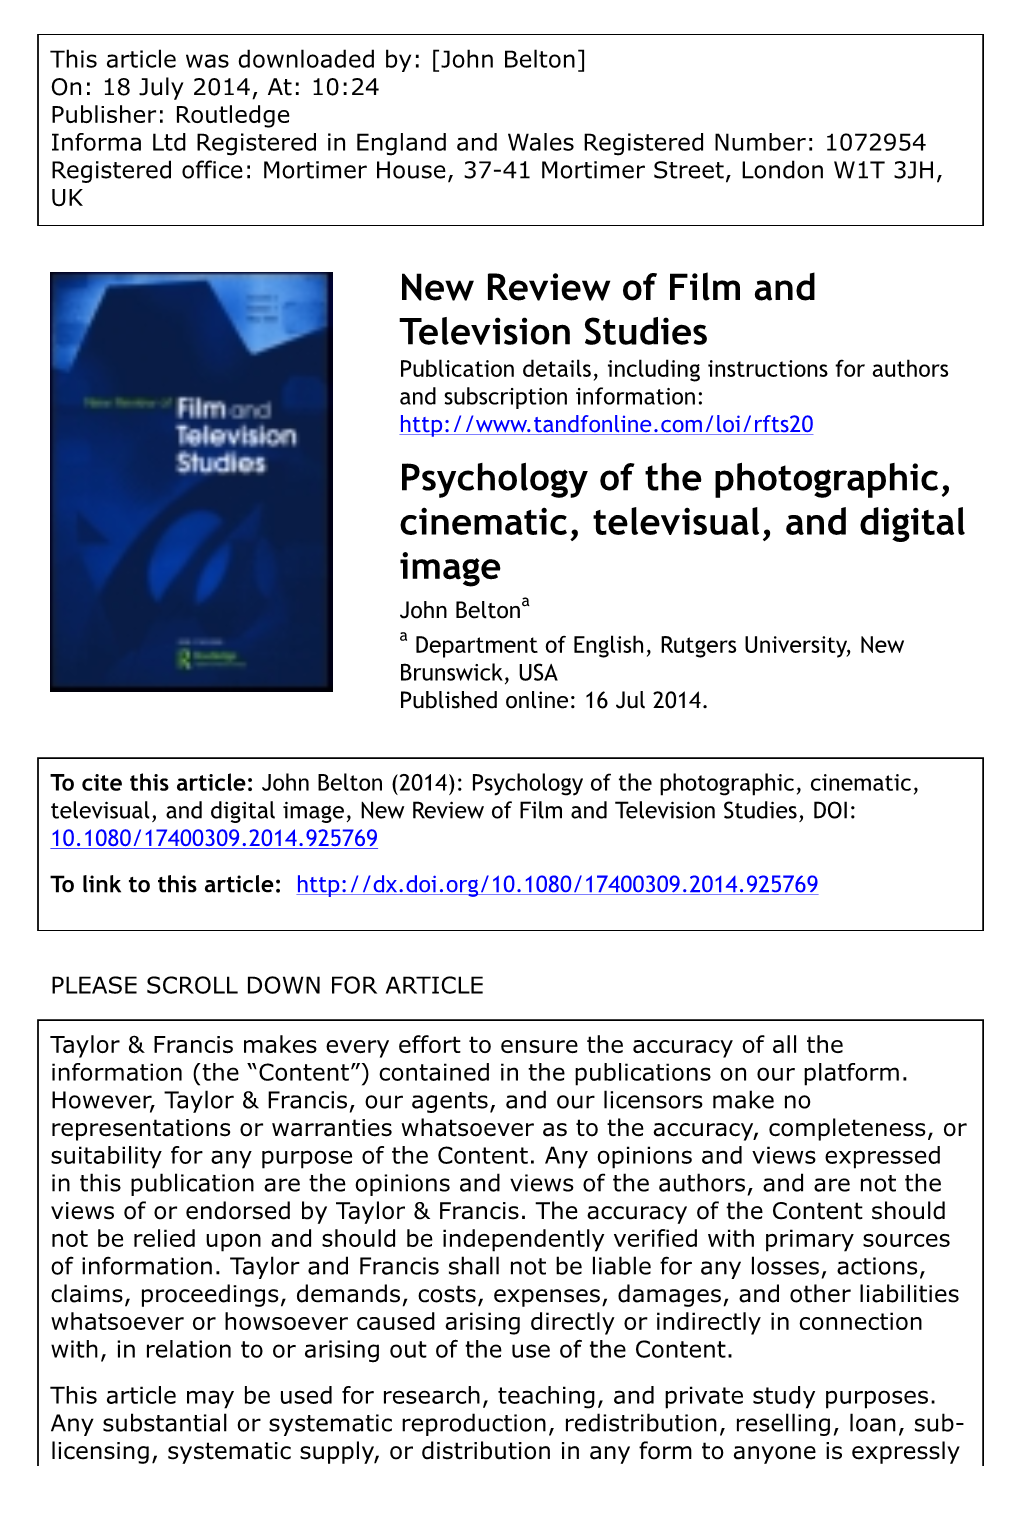 Psychology of the Photographic, Cinematic, Televisual, and Digital